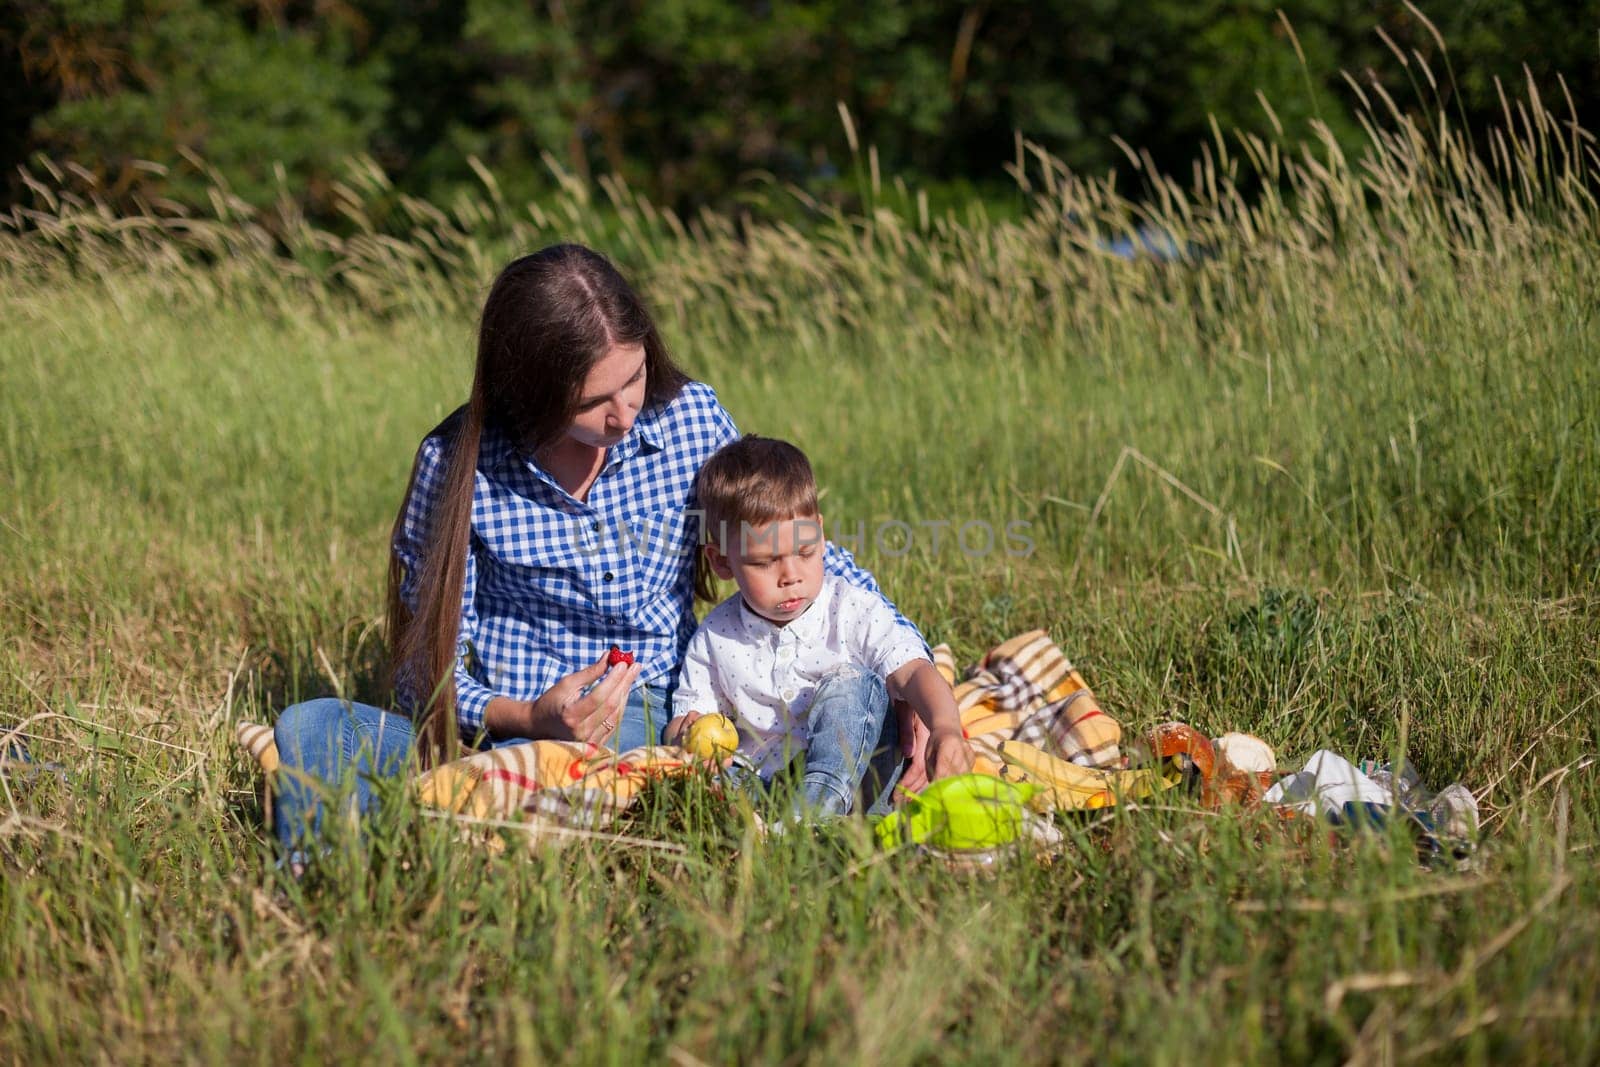 Mom and son eat in park picnic in nature family by Simakov